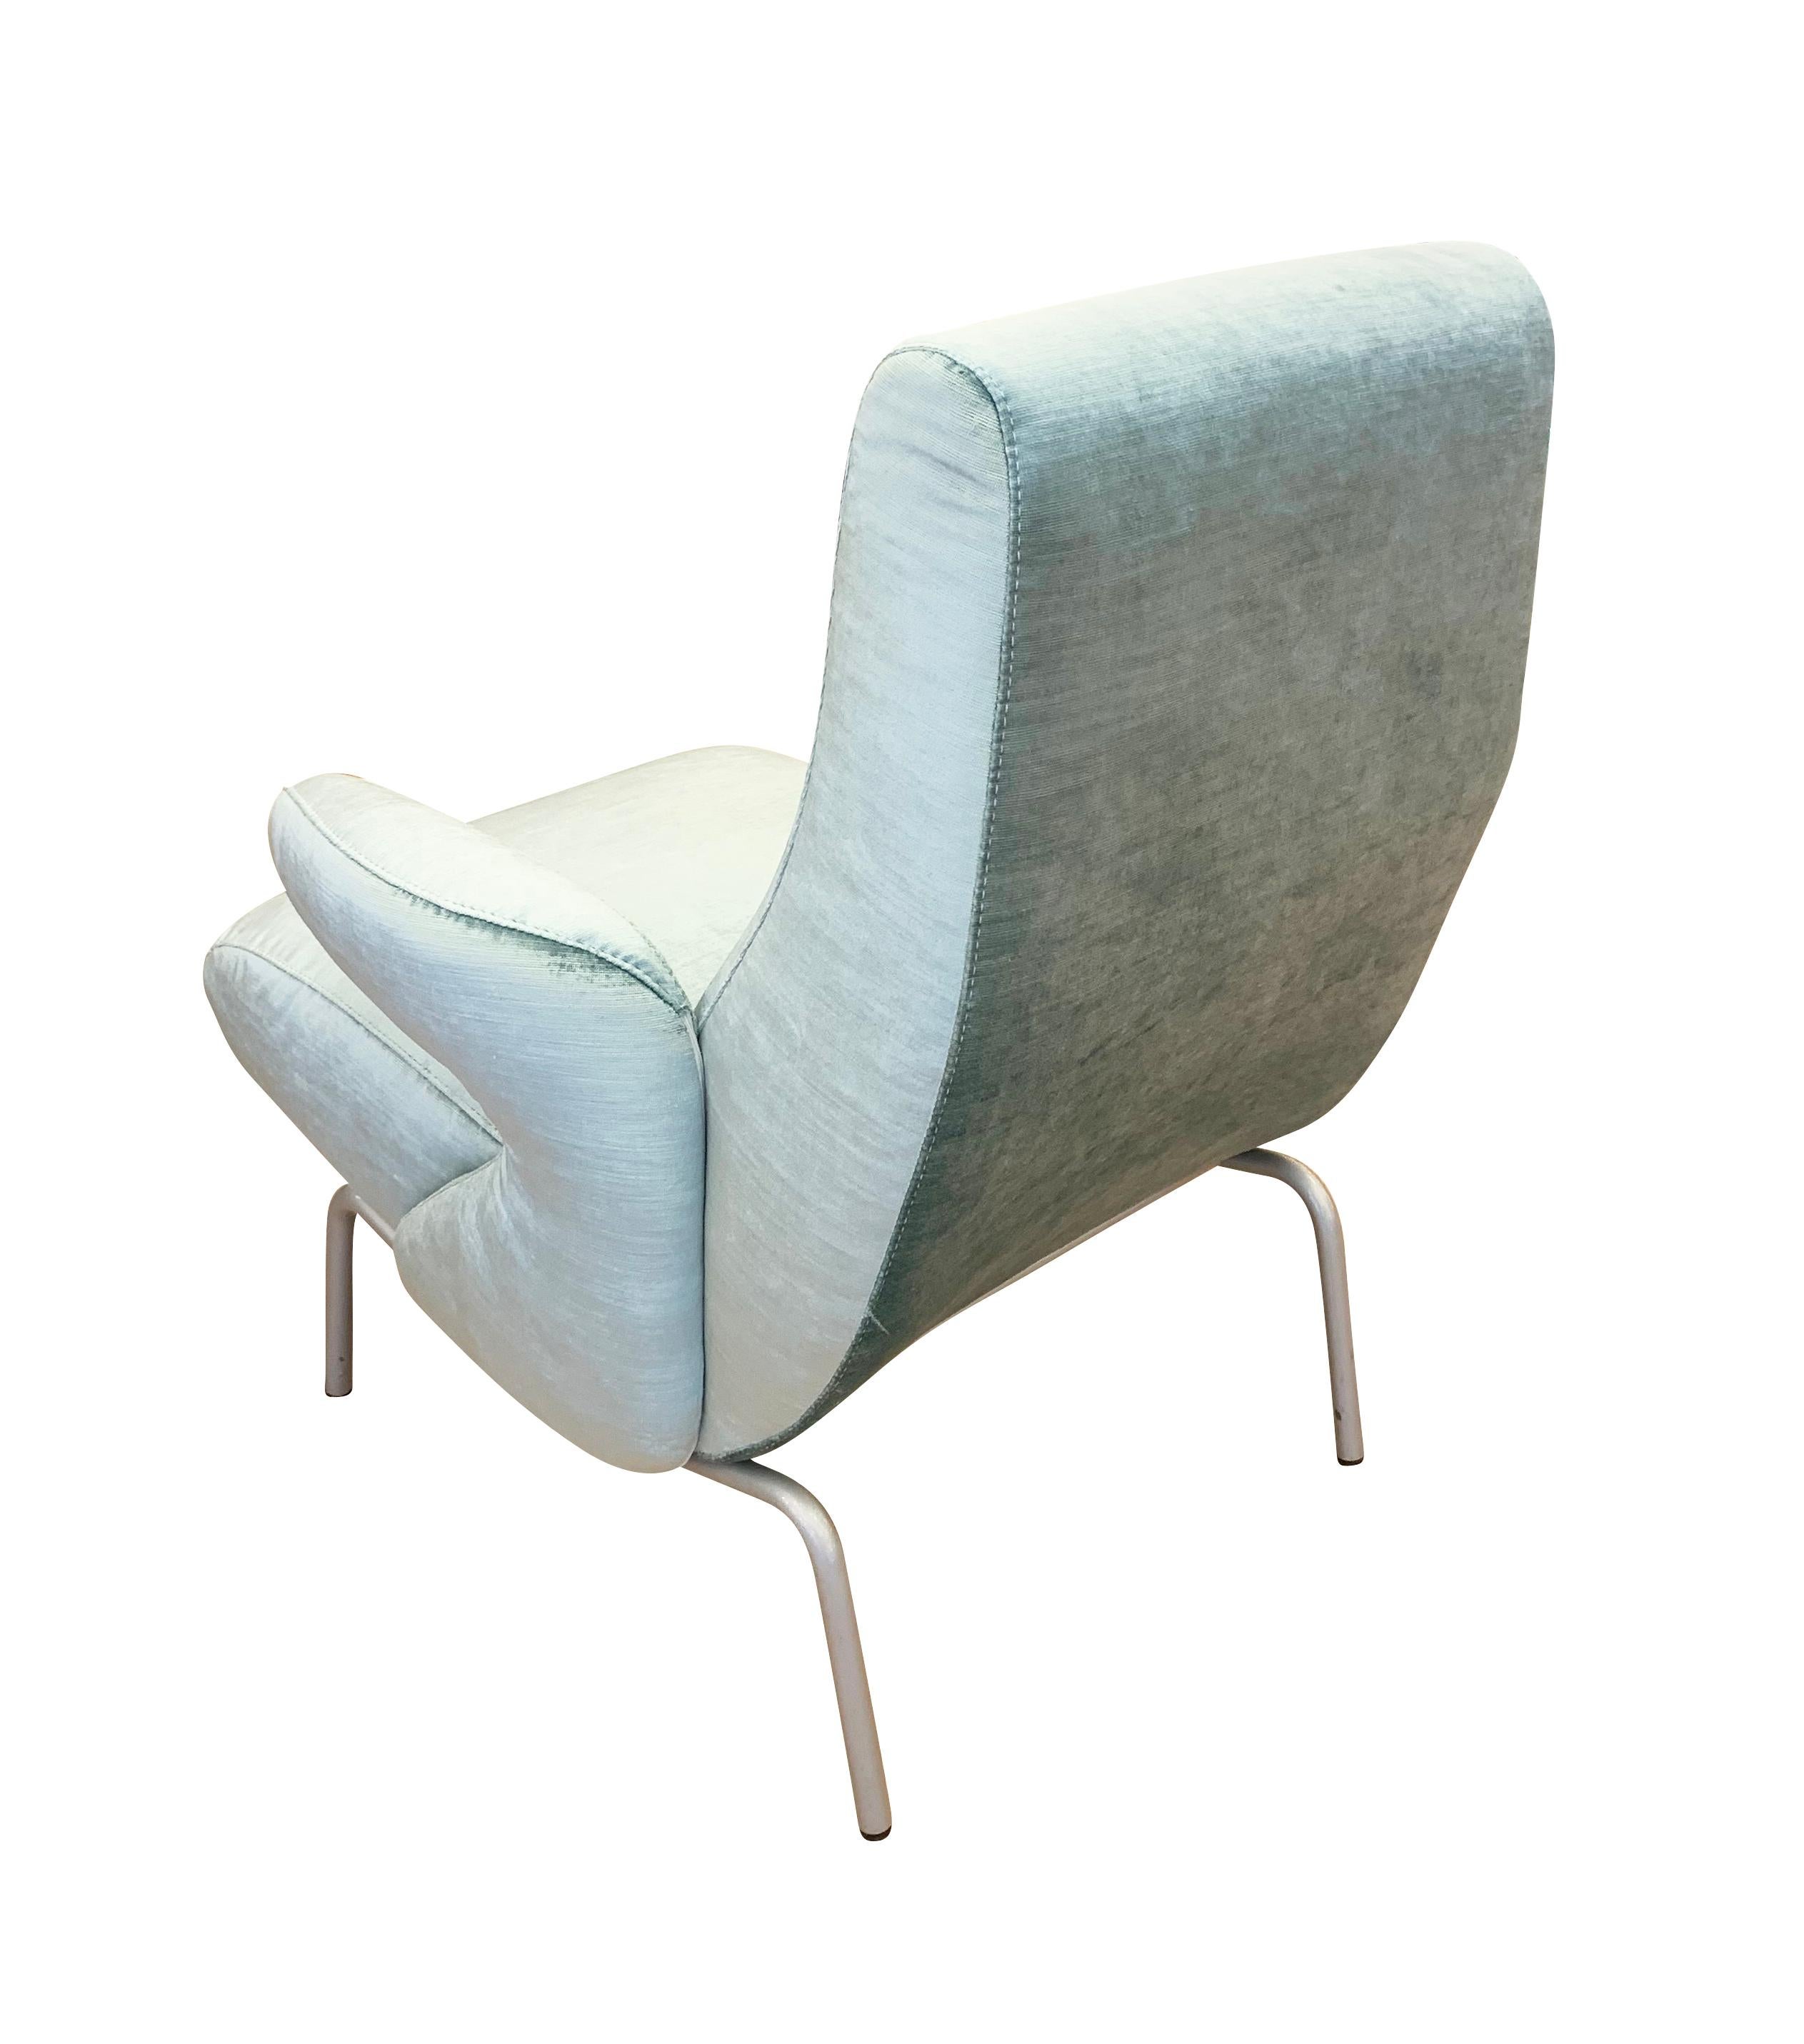 The Dolphin club chair is considered one of the best Italian armchair designs of the 50's. It was designed in 1954 by Ernesto Carboni for Arflex one of the most innovative Italian seating companies of the time.

Condition: Excellent vintage